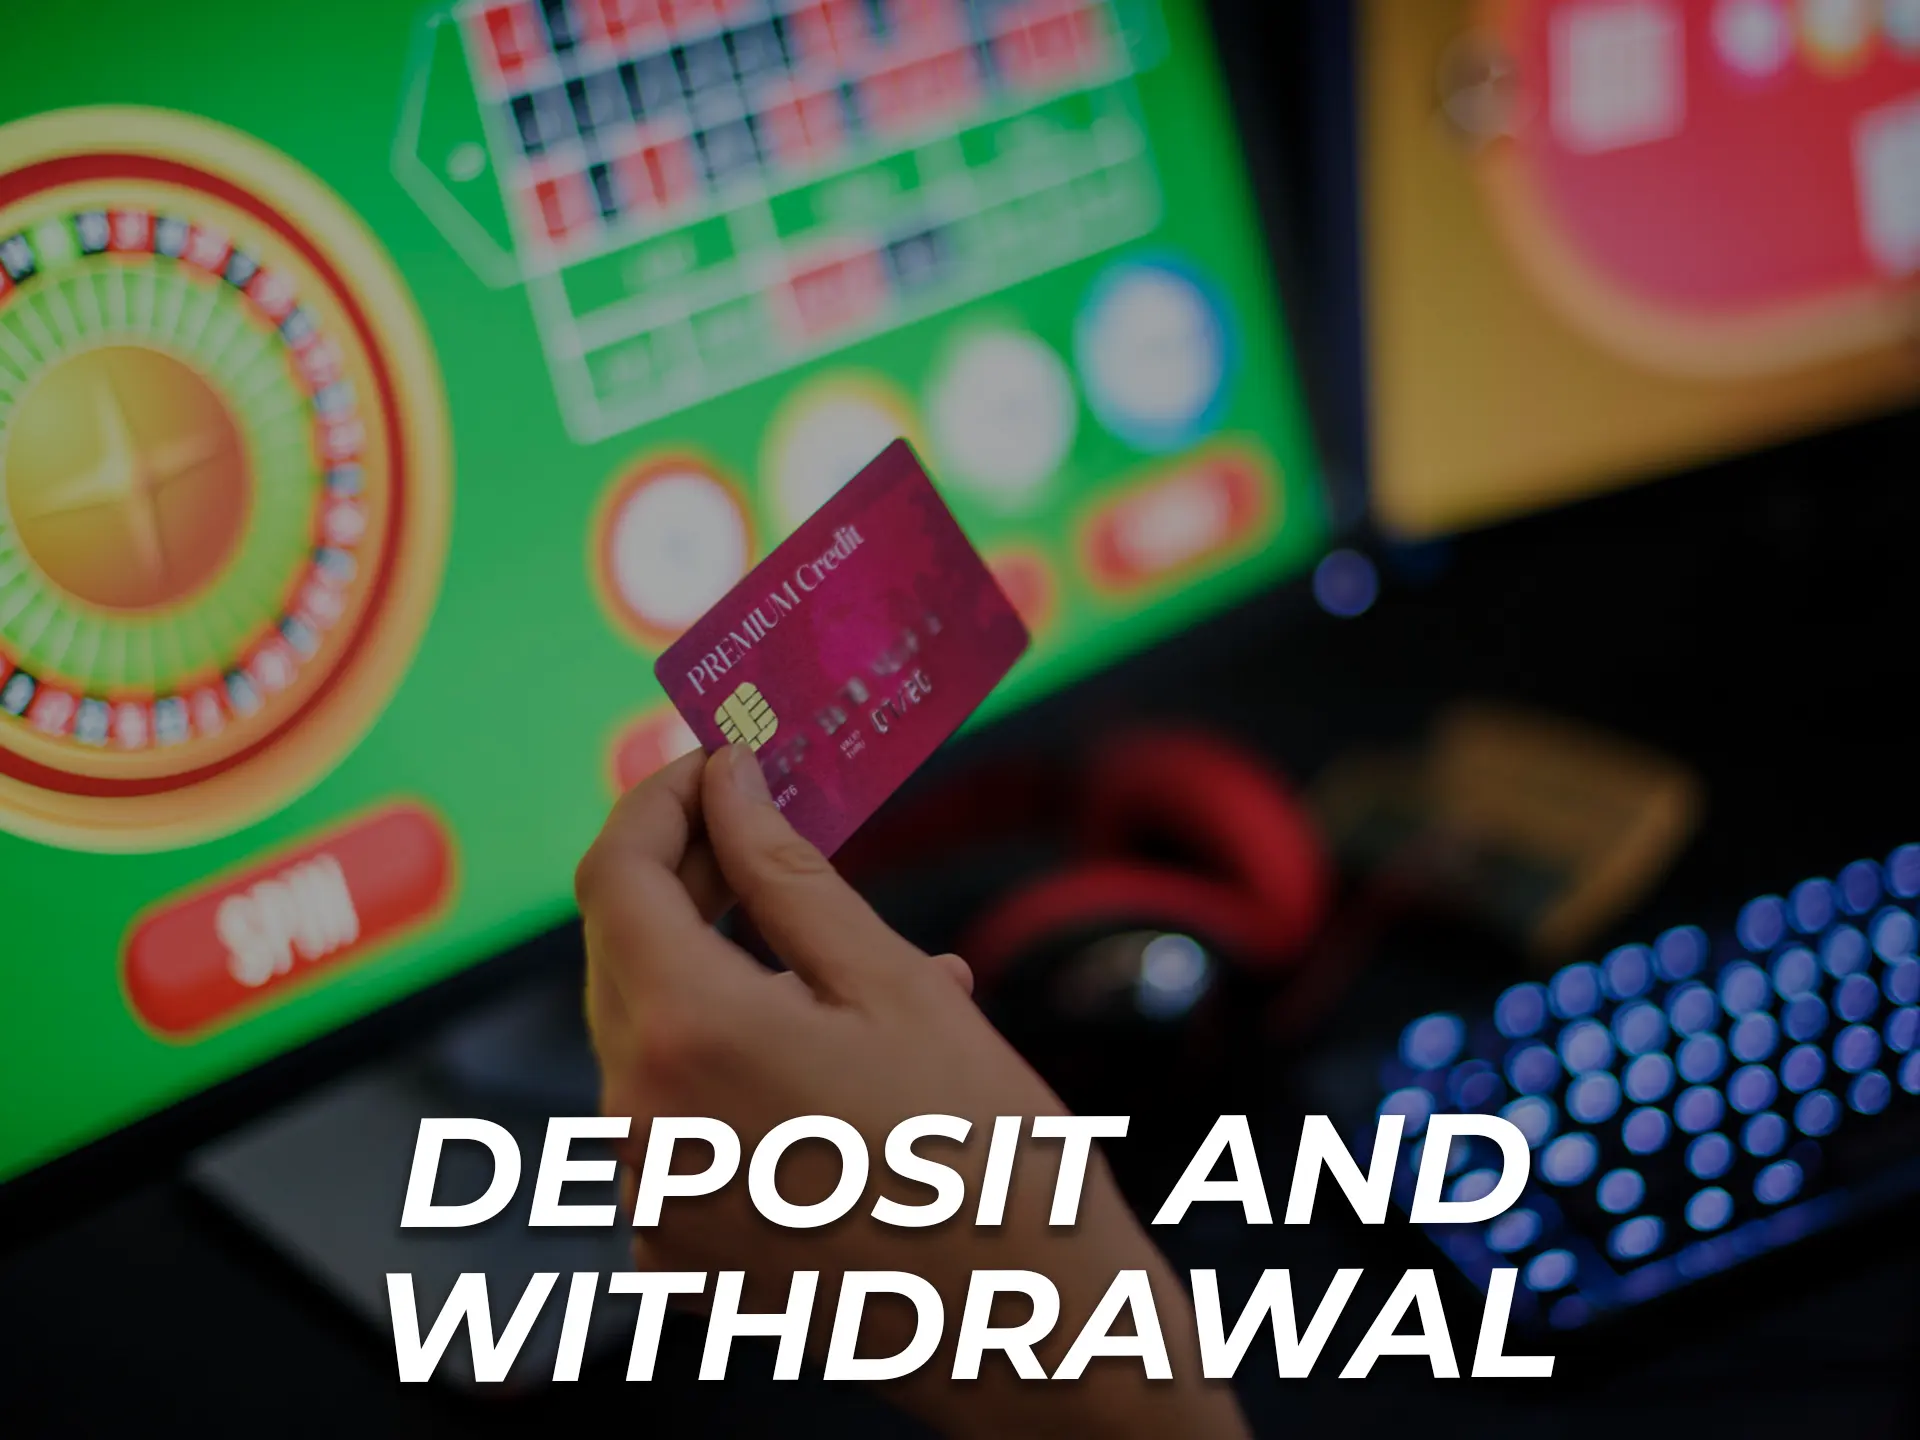 Depositing and withdrawing funds on the site should be convenient and safe for players.